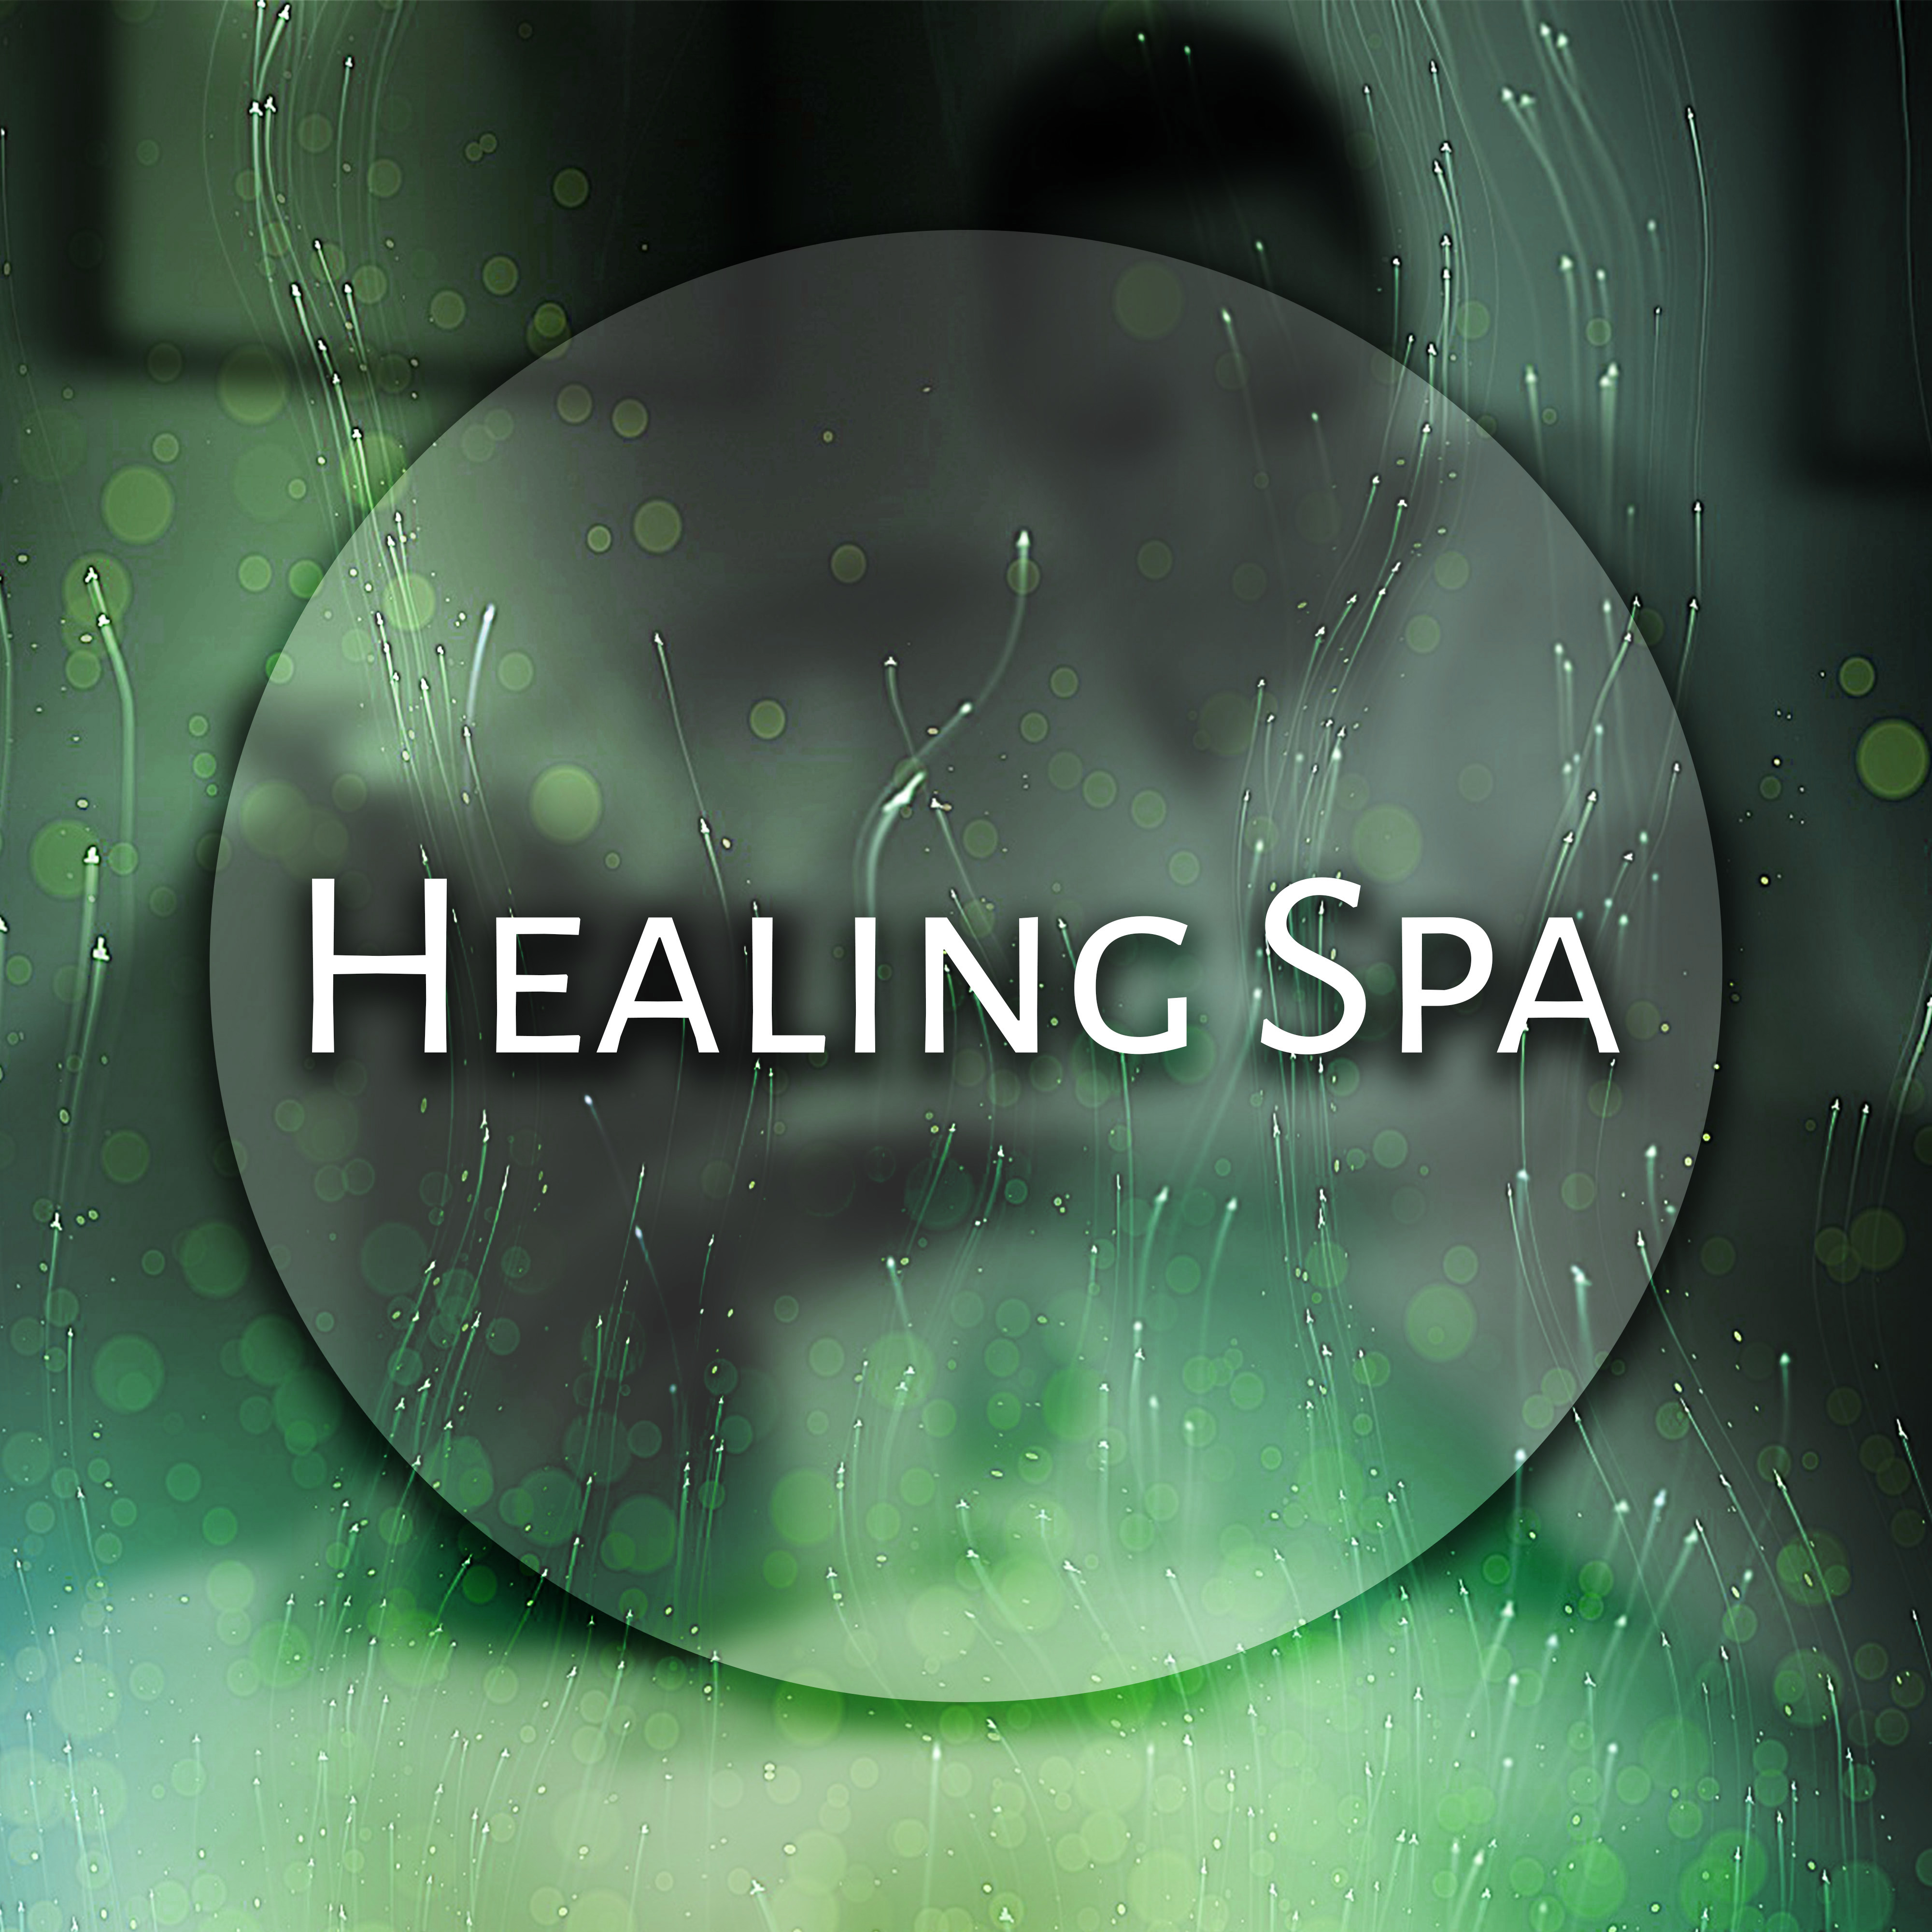 Healing Spa – Serenity Nature Sounds for Massage, Wellness, Relief, Sea Waves, Ocean Dreams, Pure Mind, Spa Music